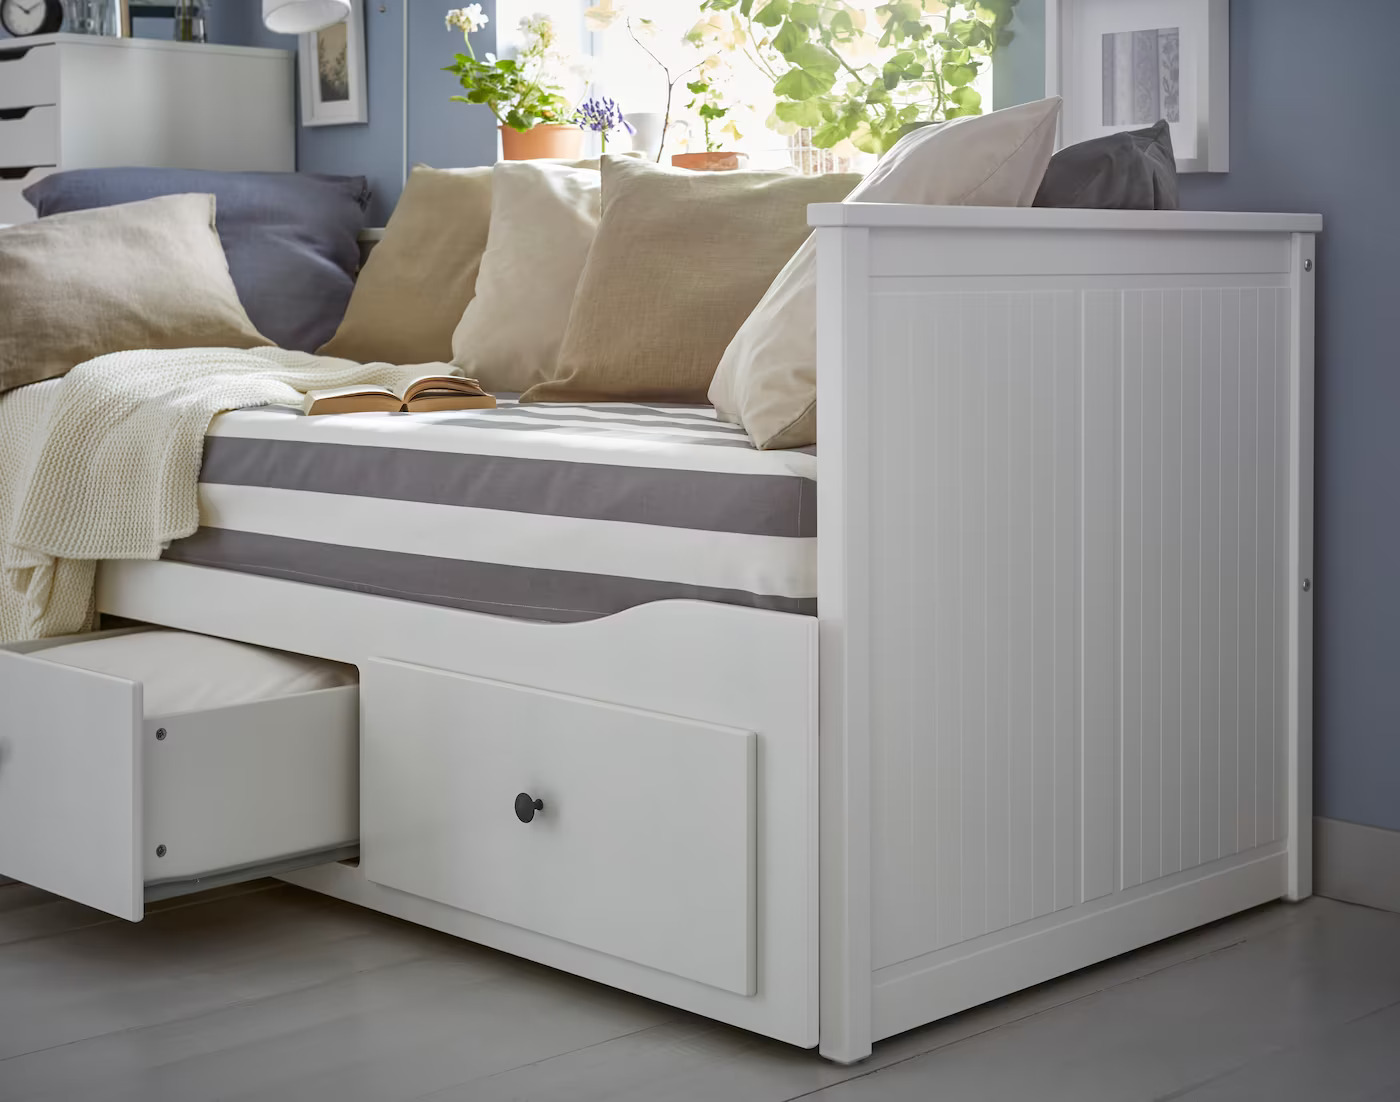 A multifunctional white daybed, featuring drawers for enhanced storage capabilities.